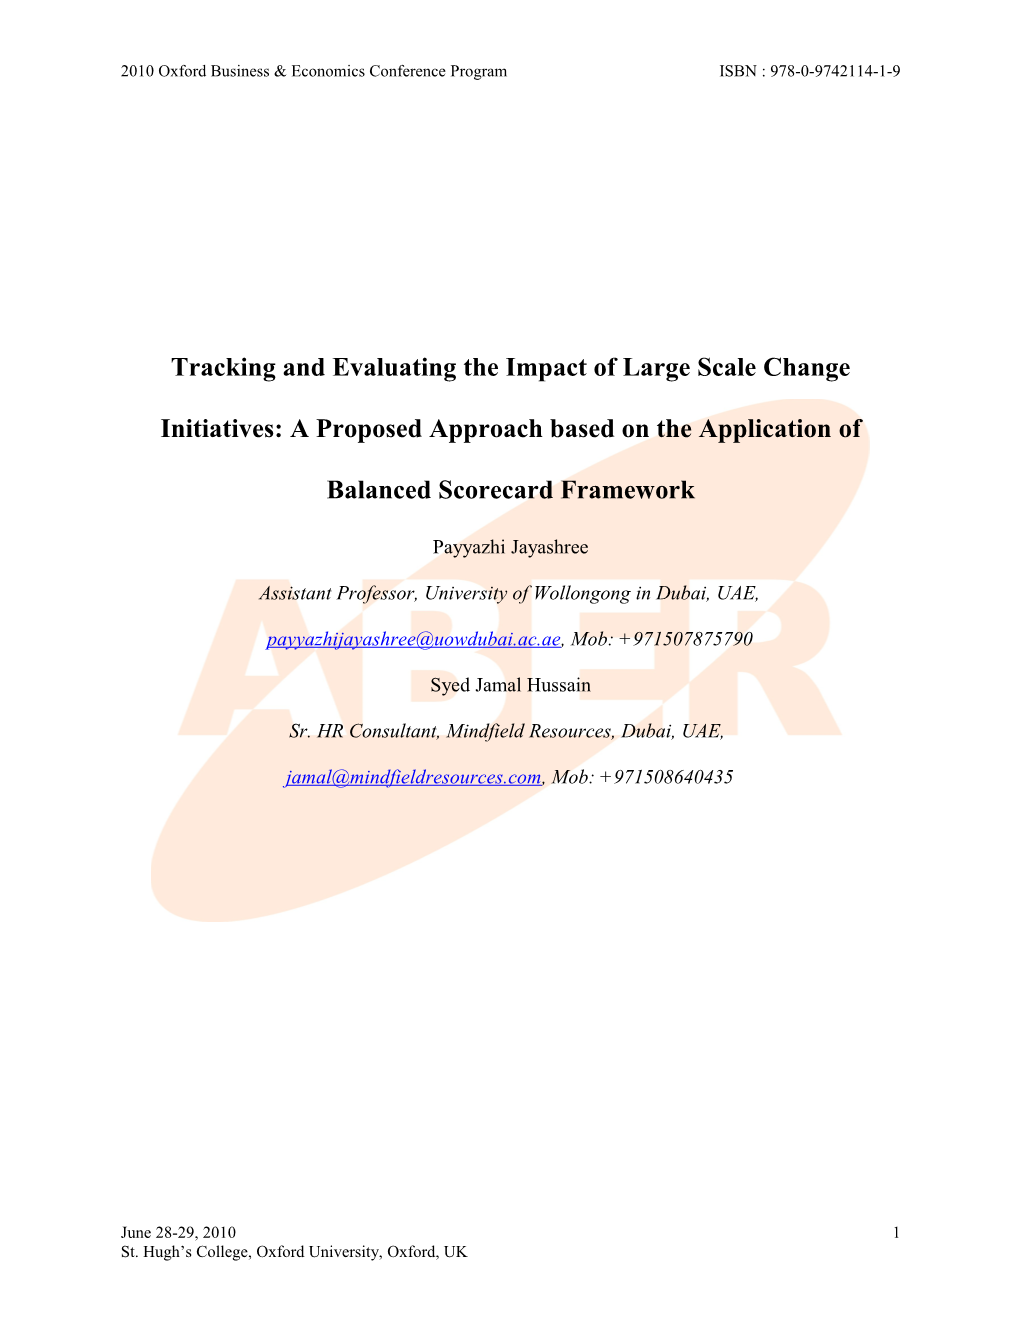 Tracking and Evaluating the Impact of Large Scale Change Initiatives: a Proposed Approach